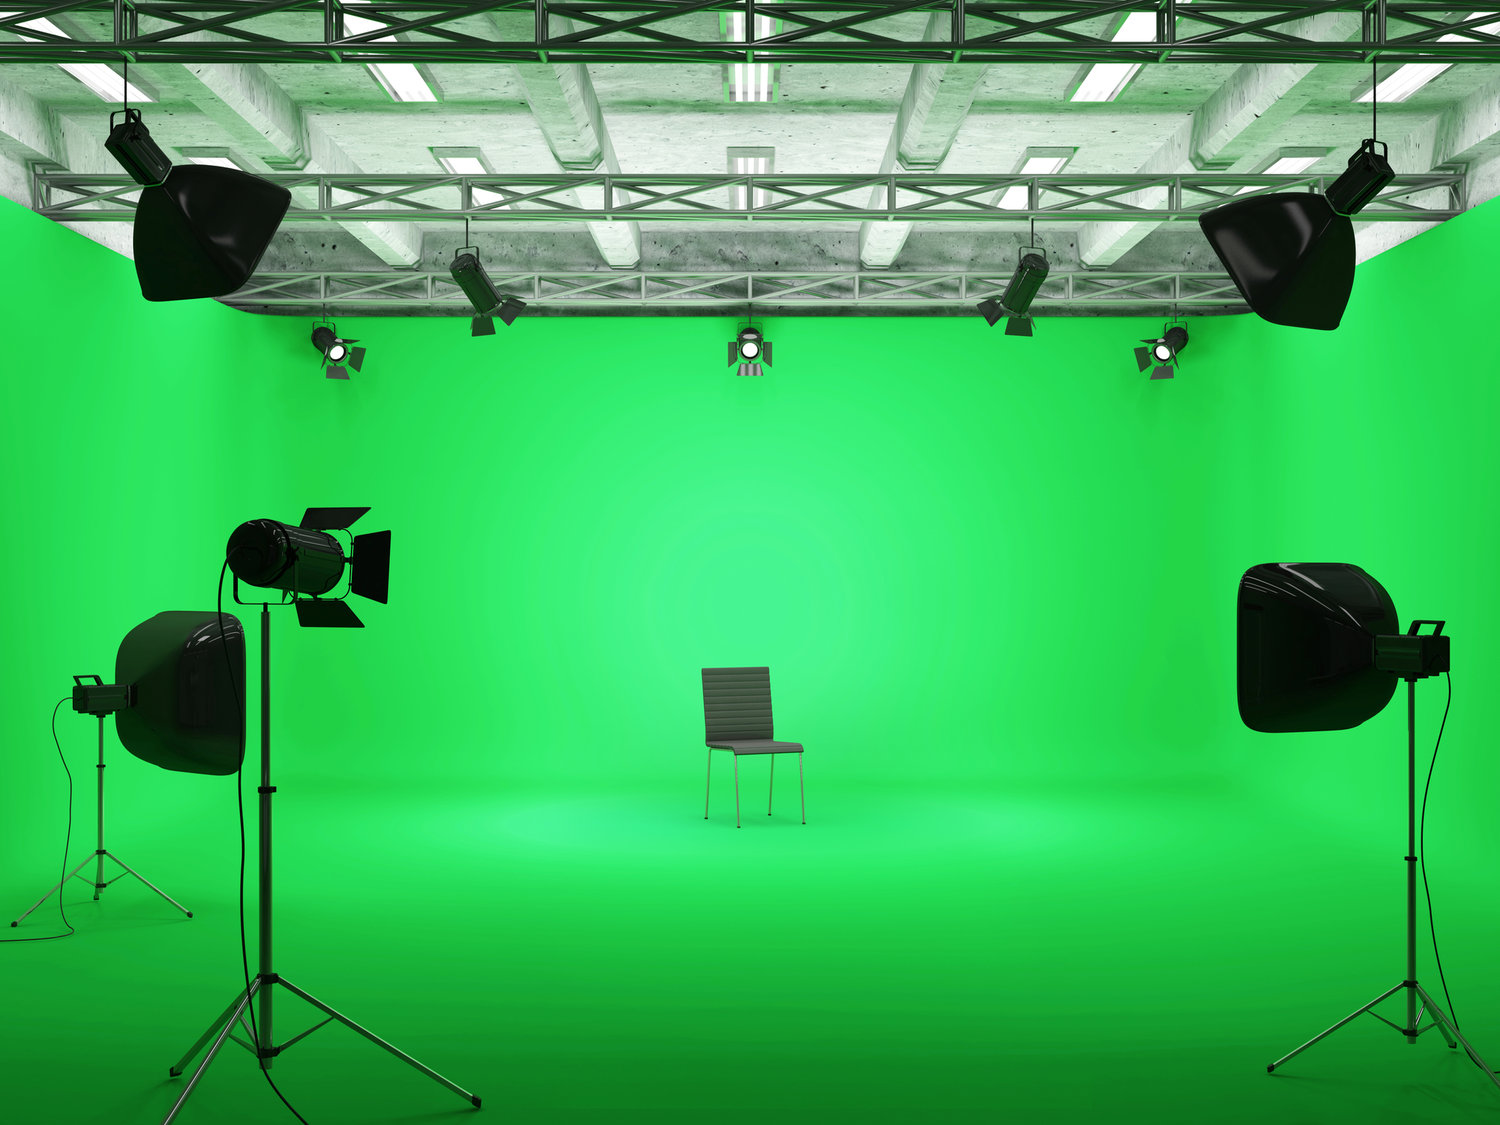 Pavilion Interior of Modern Film Studio with Green Screen and Light Equipment